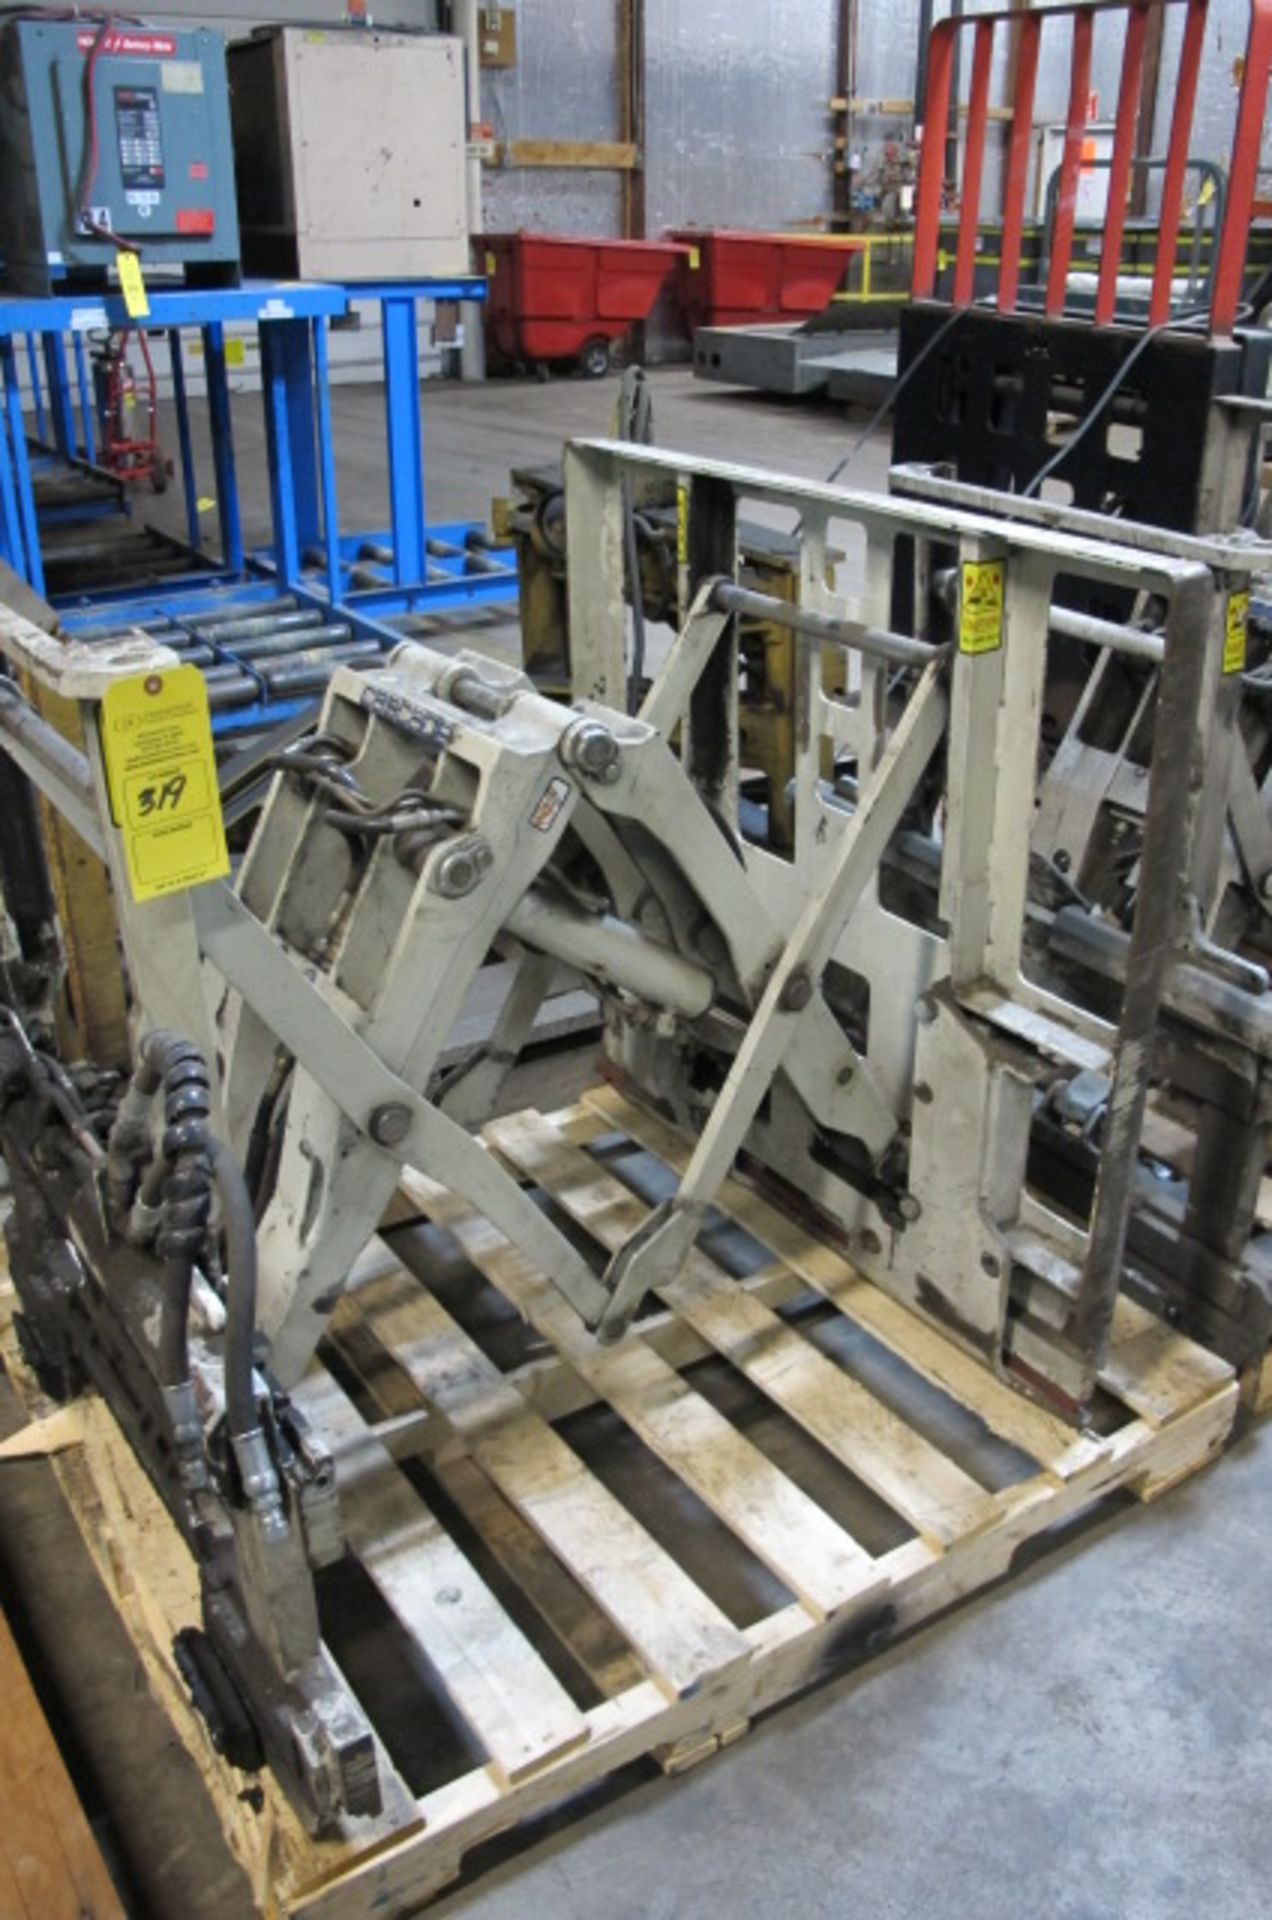 CASCADE FORK LIFT ATTACHMENT 7667 OH 120, Lyons, Ohio 43523 - all Gaylord plastic pallets are NOT